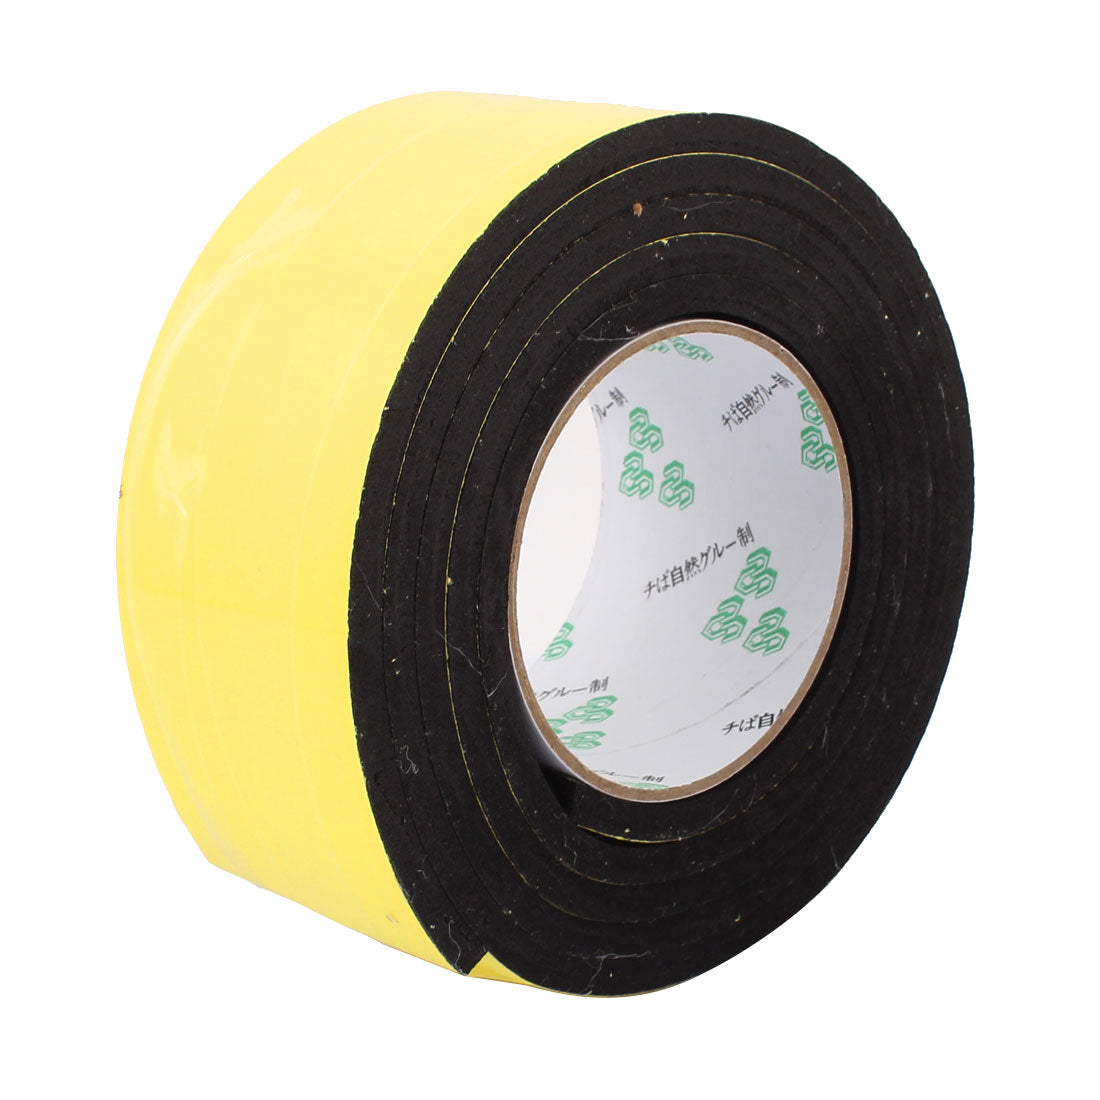 uxcell Uxcell 60mm x 6mm Single Sided Self Adhesive Shockproof Sponge Foam Tape 2 Meters Length